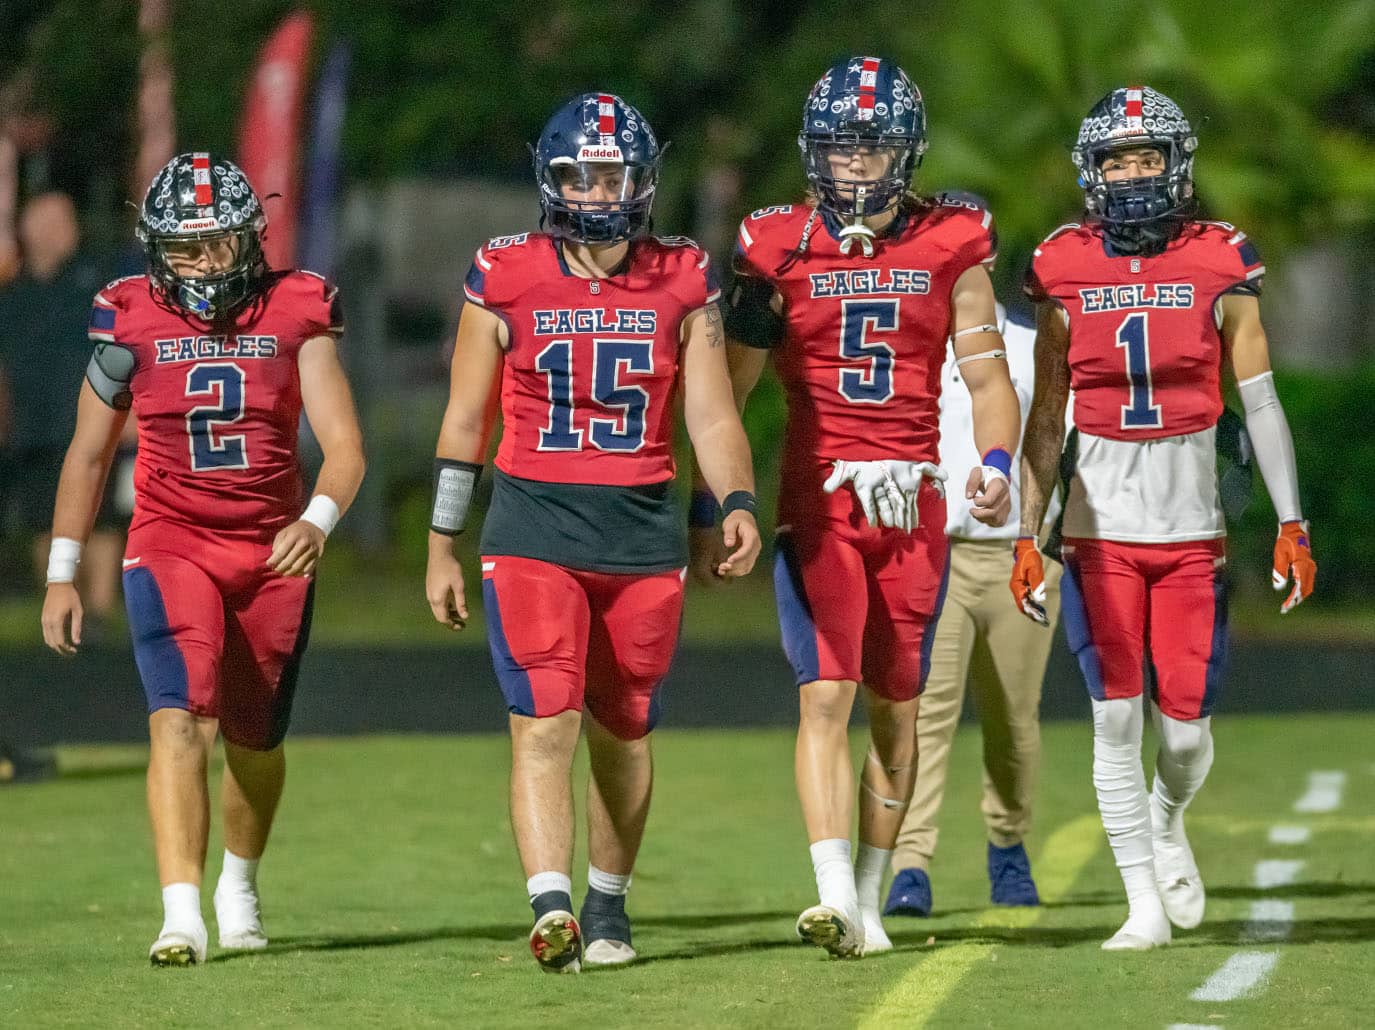 Springstead High, 2, Roman Strat, 15, Ayden Ferguson, 5, Madden Barutczuk, and 1, Luca Garguillo assemble for the coin toss before taking on Mitchell High in a home playoff. Photo by JOE DiCRISTOFALO